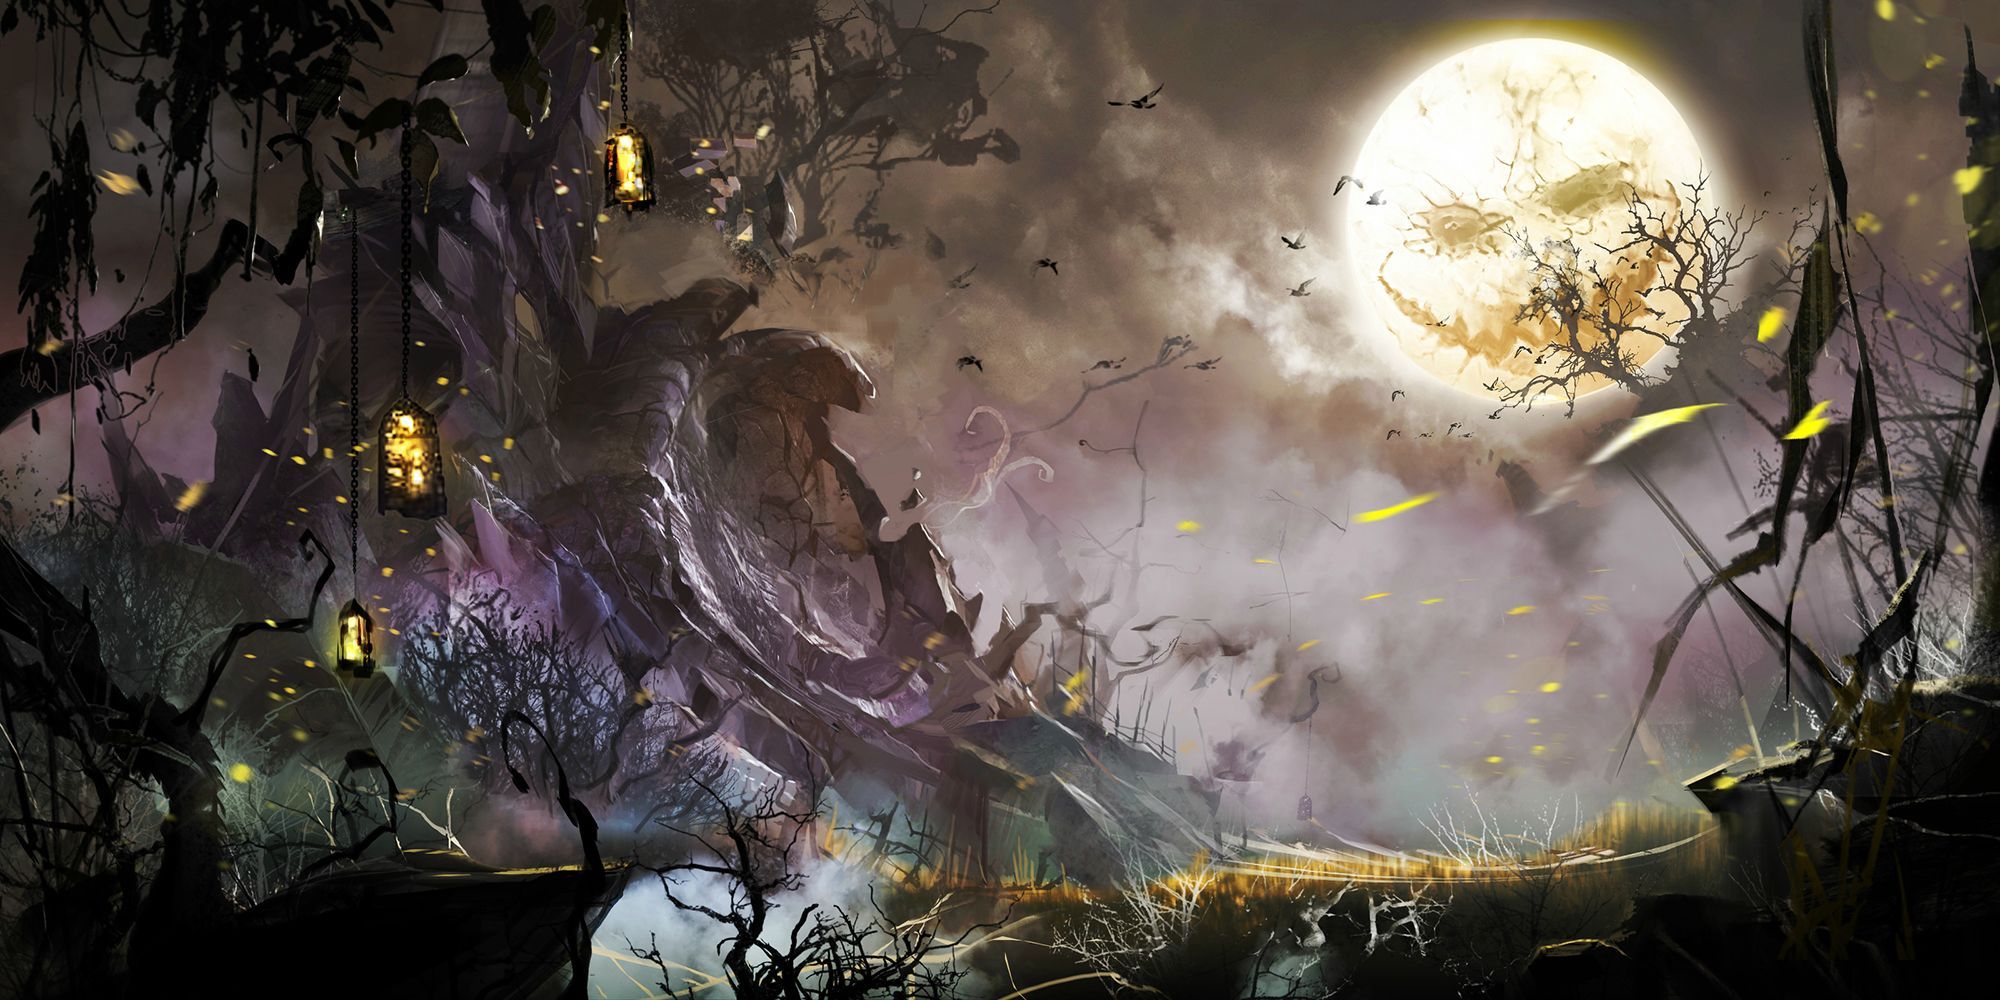 If any of you were looking for a Halloween themed video game art wallpaper. (Guild Wars 2)